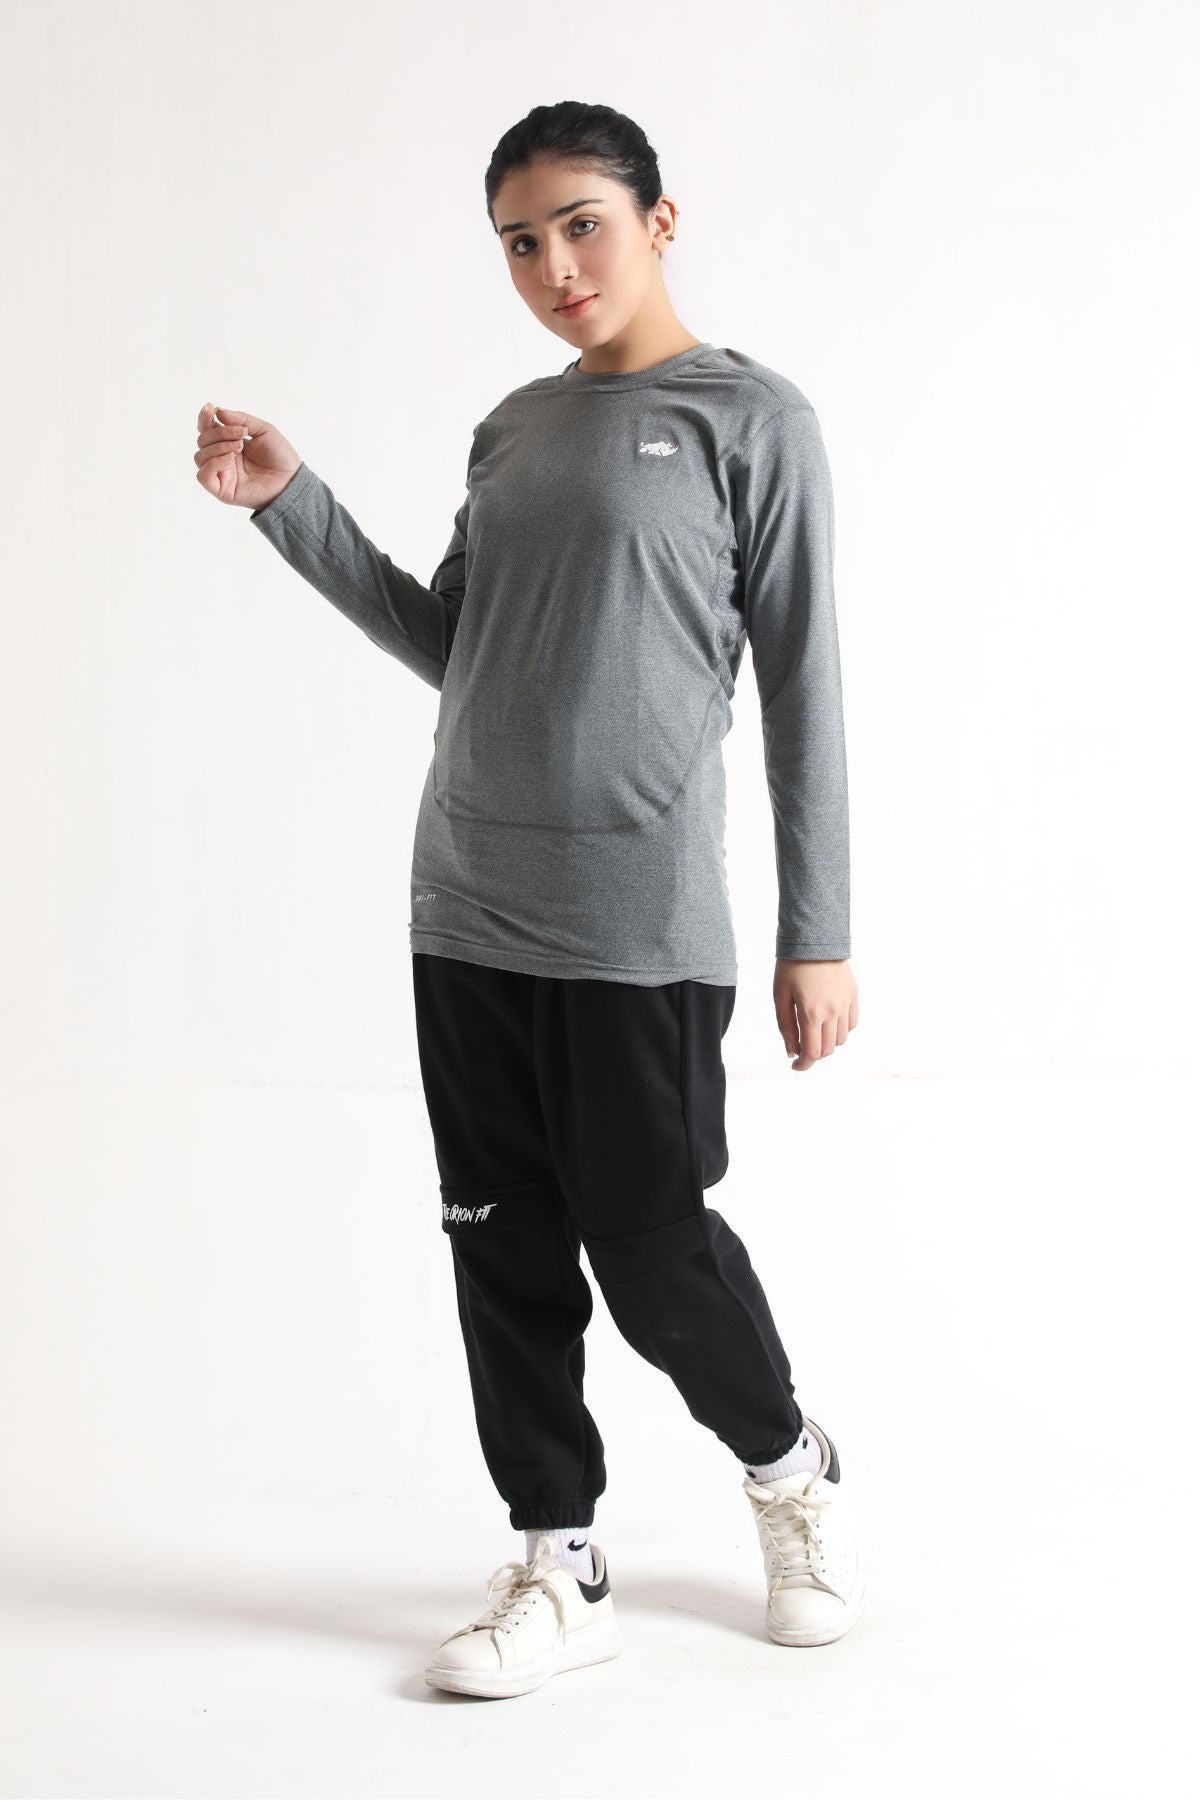 SIGNATURE LONG SLEEVED STRAIGHT CUT TEE- LIGHT GREY - The Orion Fit